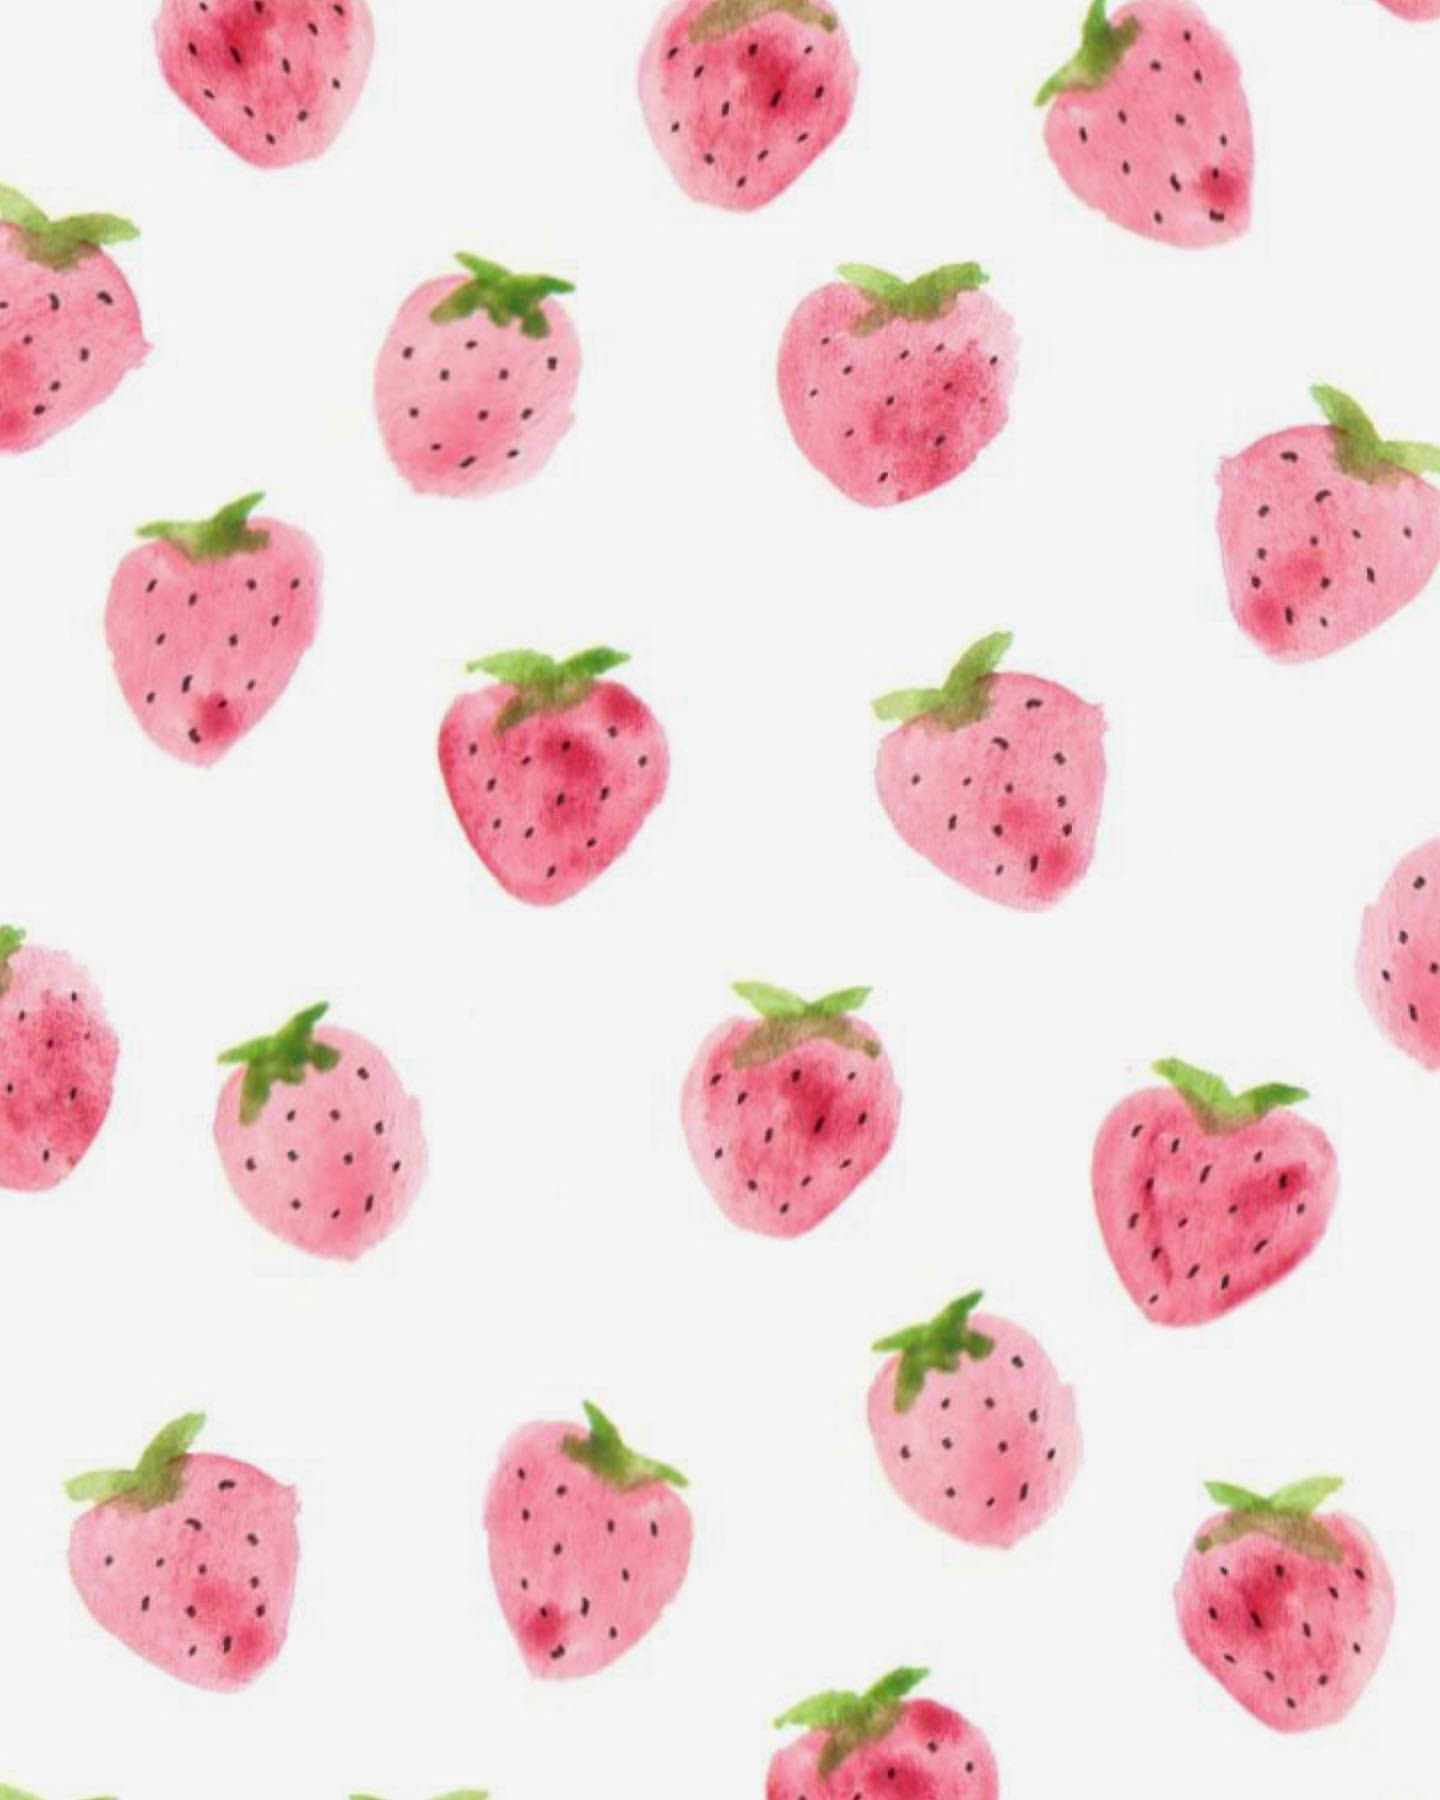 Tempting and Refreshing Strawberry Aesthetic Wallpaper